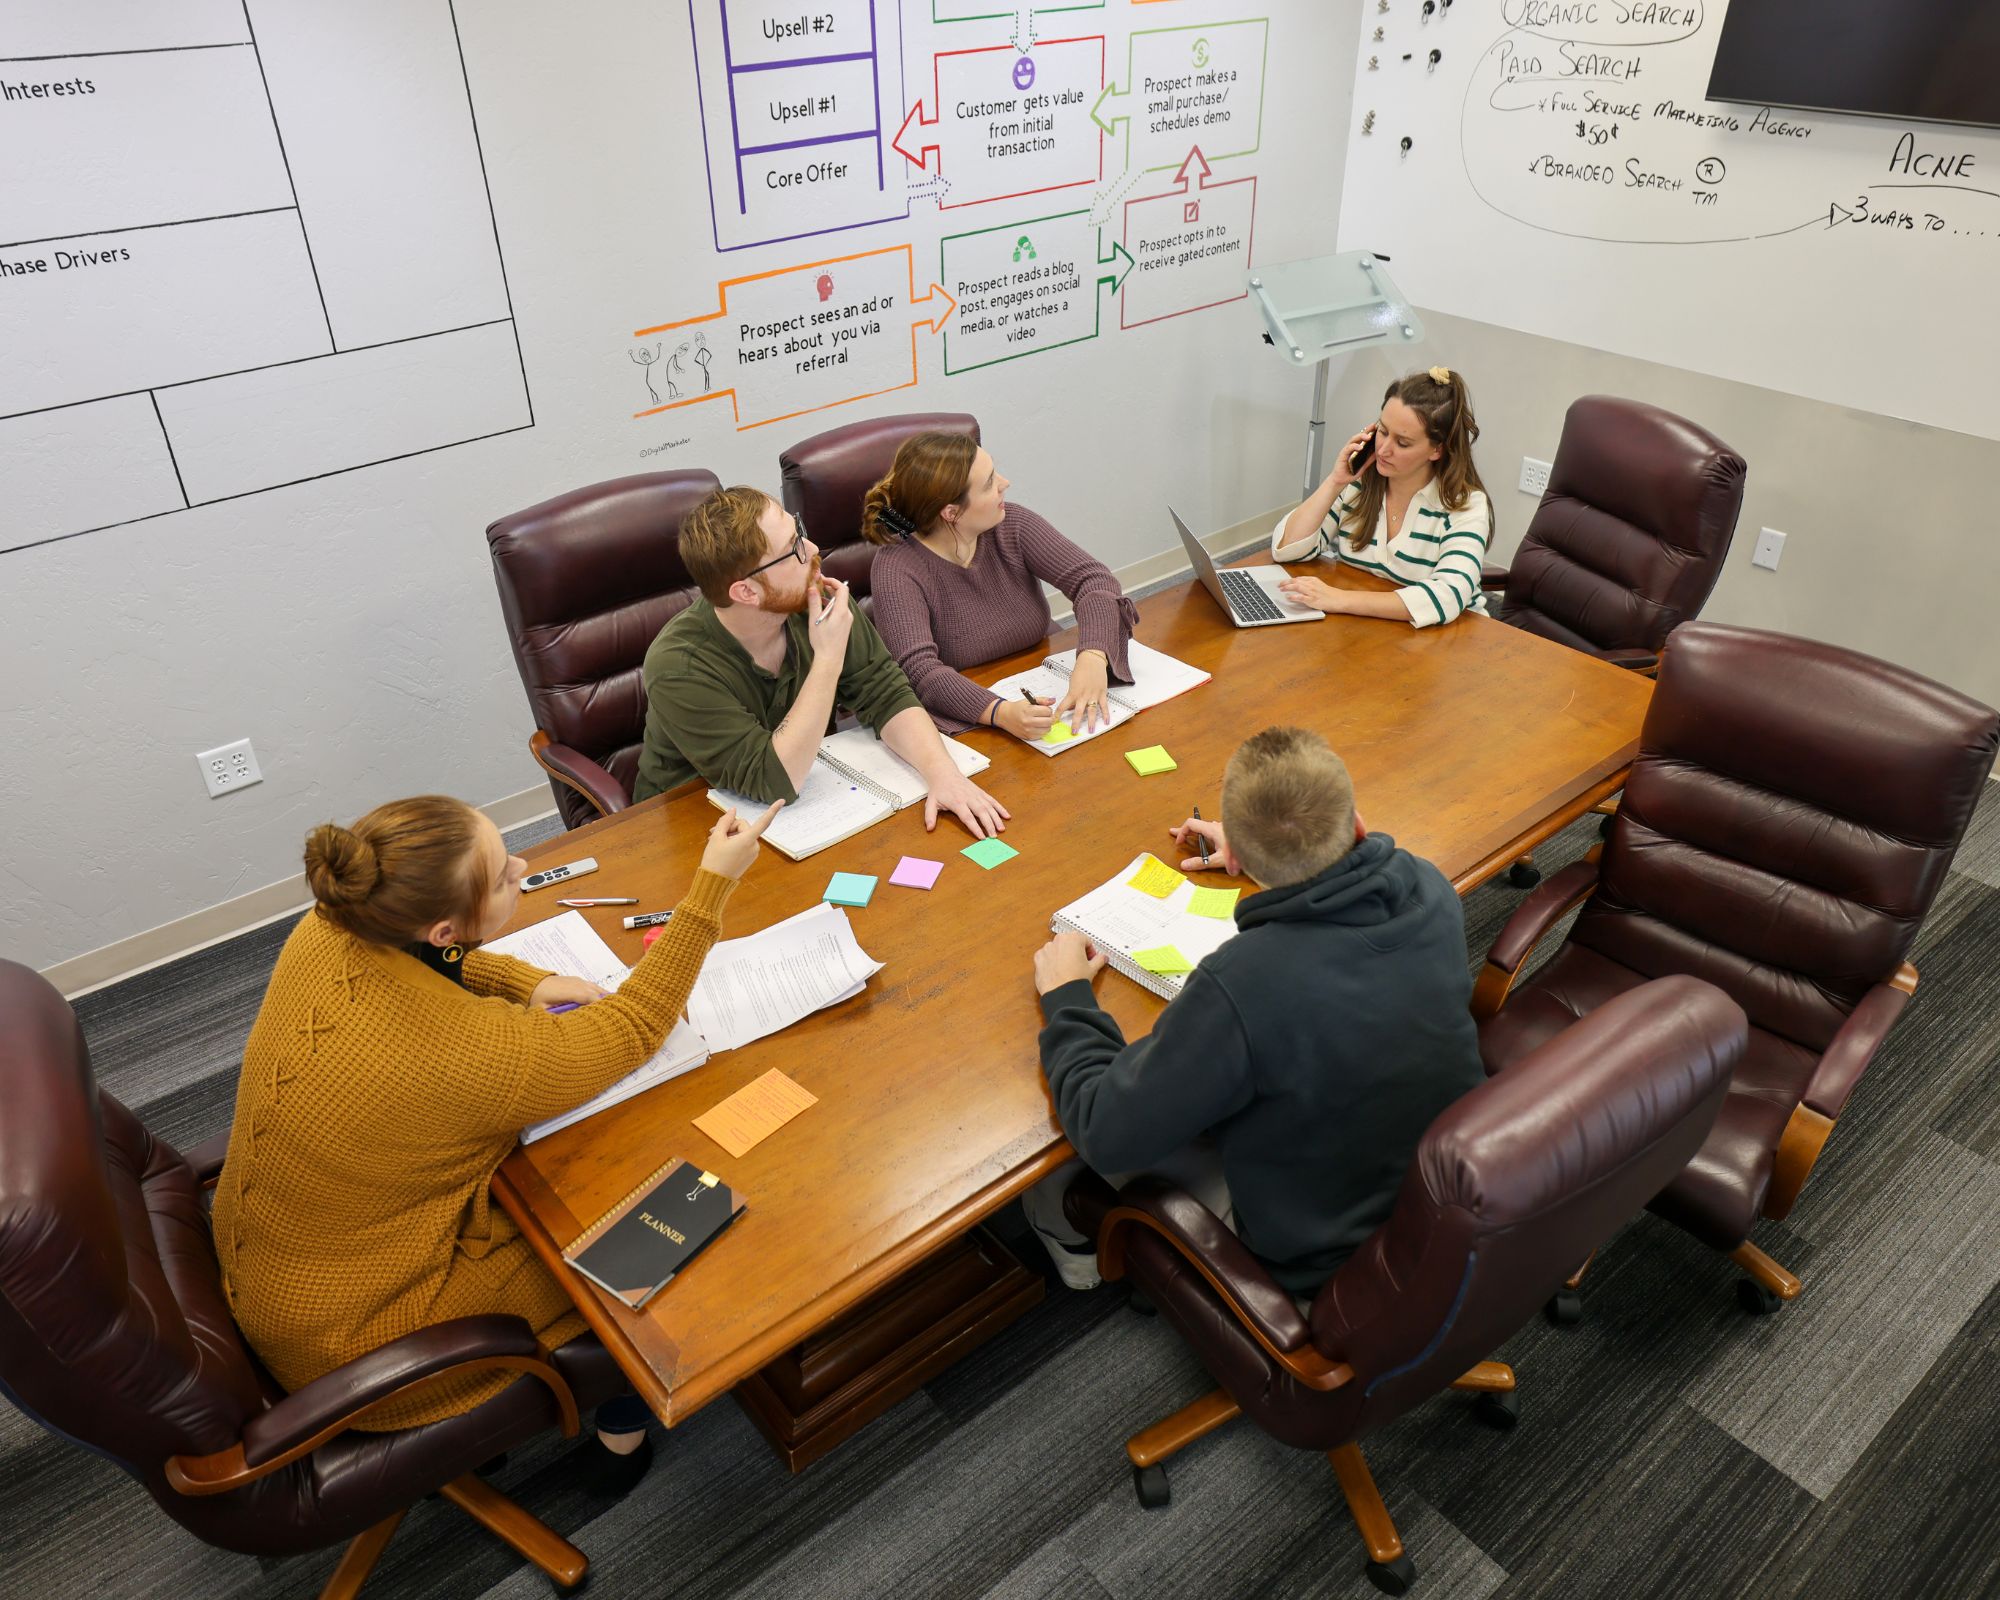 Employees at the nonprofit marketing agency Viral Solutions collaborating on a marketing strategy.